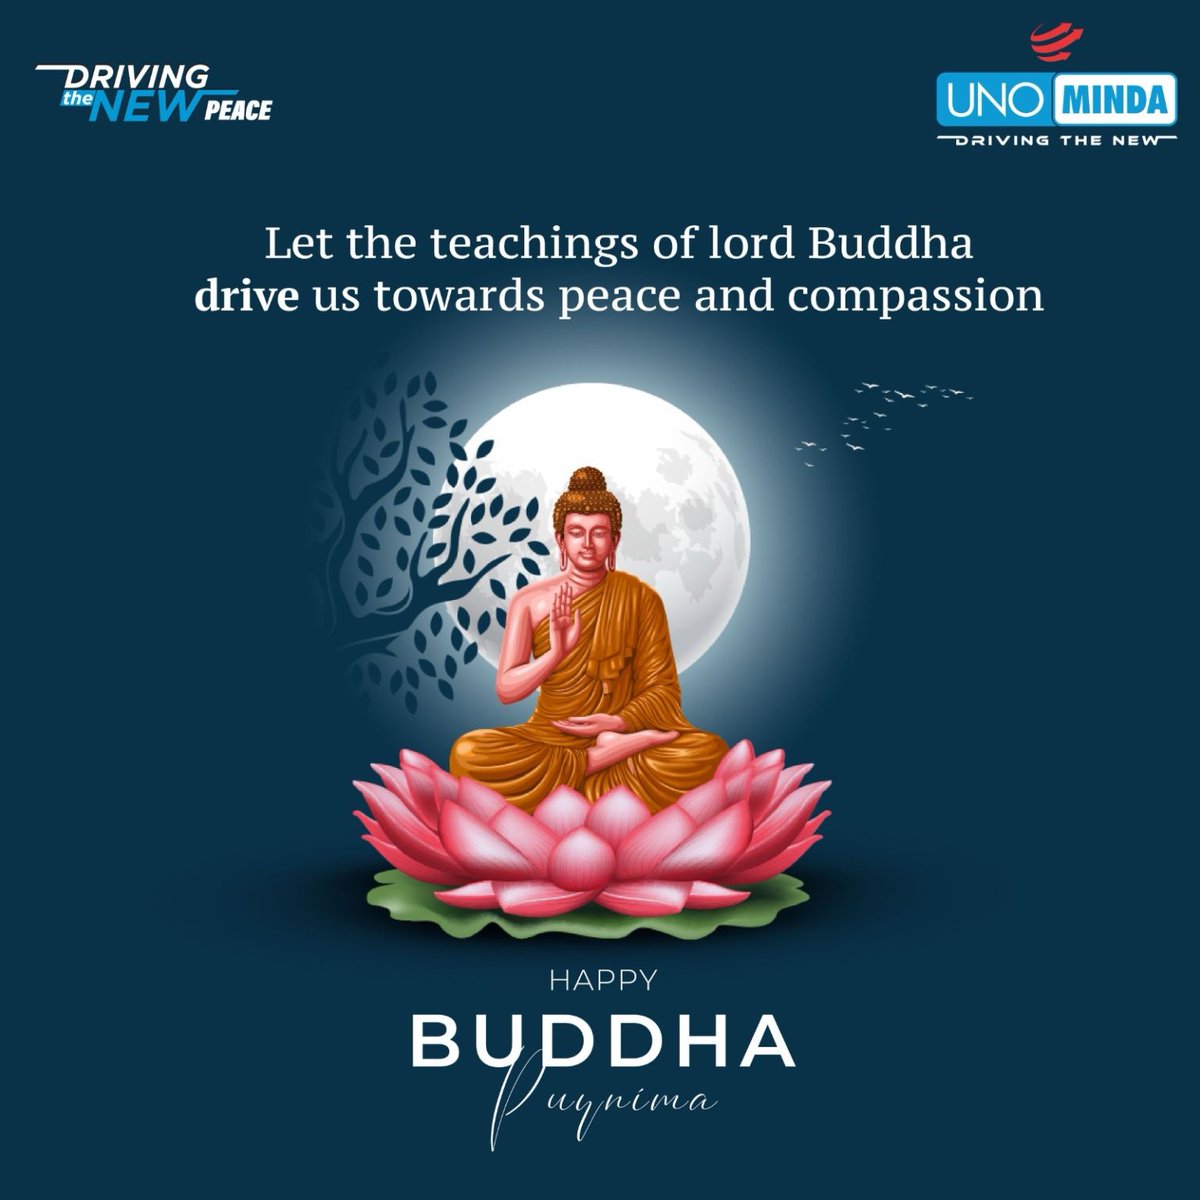 Let the teachings of Lord Buddha drive us towards peace and compassion. Happy Buddha Purnima from Uno Minda! 🌸✨ 

#BuddhaPurnima #Peace #Compassion #UnoMinda #UnoMinda #drivingthenew #drivingchange #innovation #technology #innovation #autocomponentleader #technologyleadership